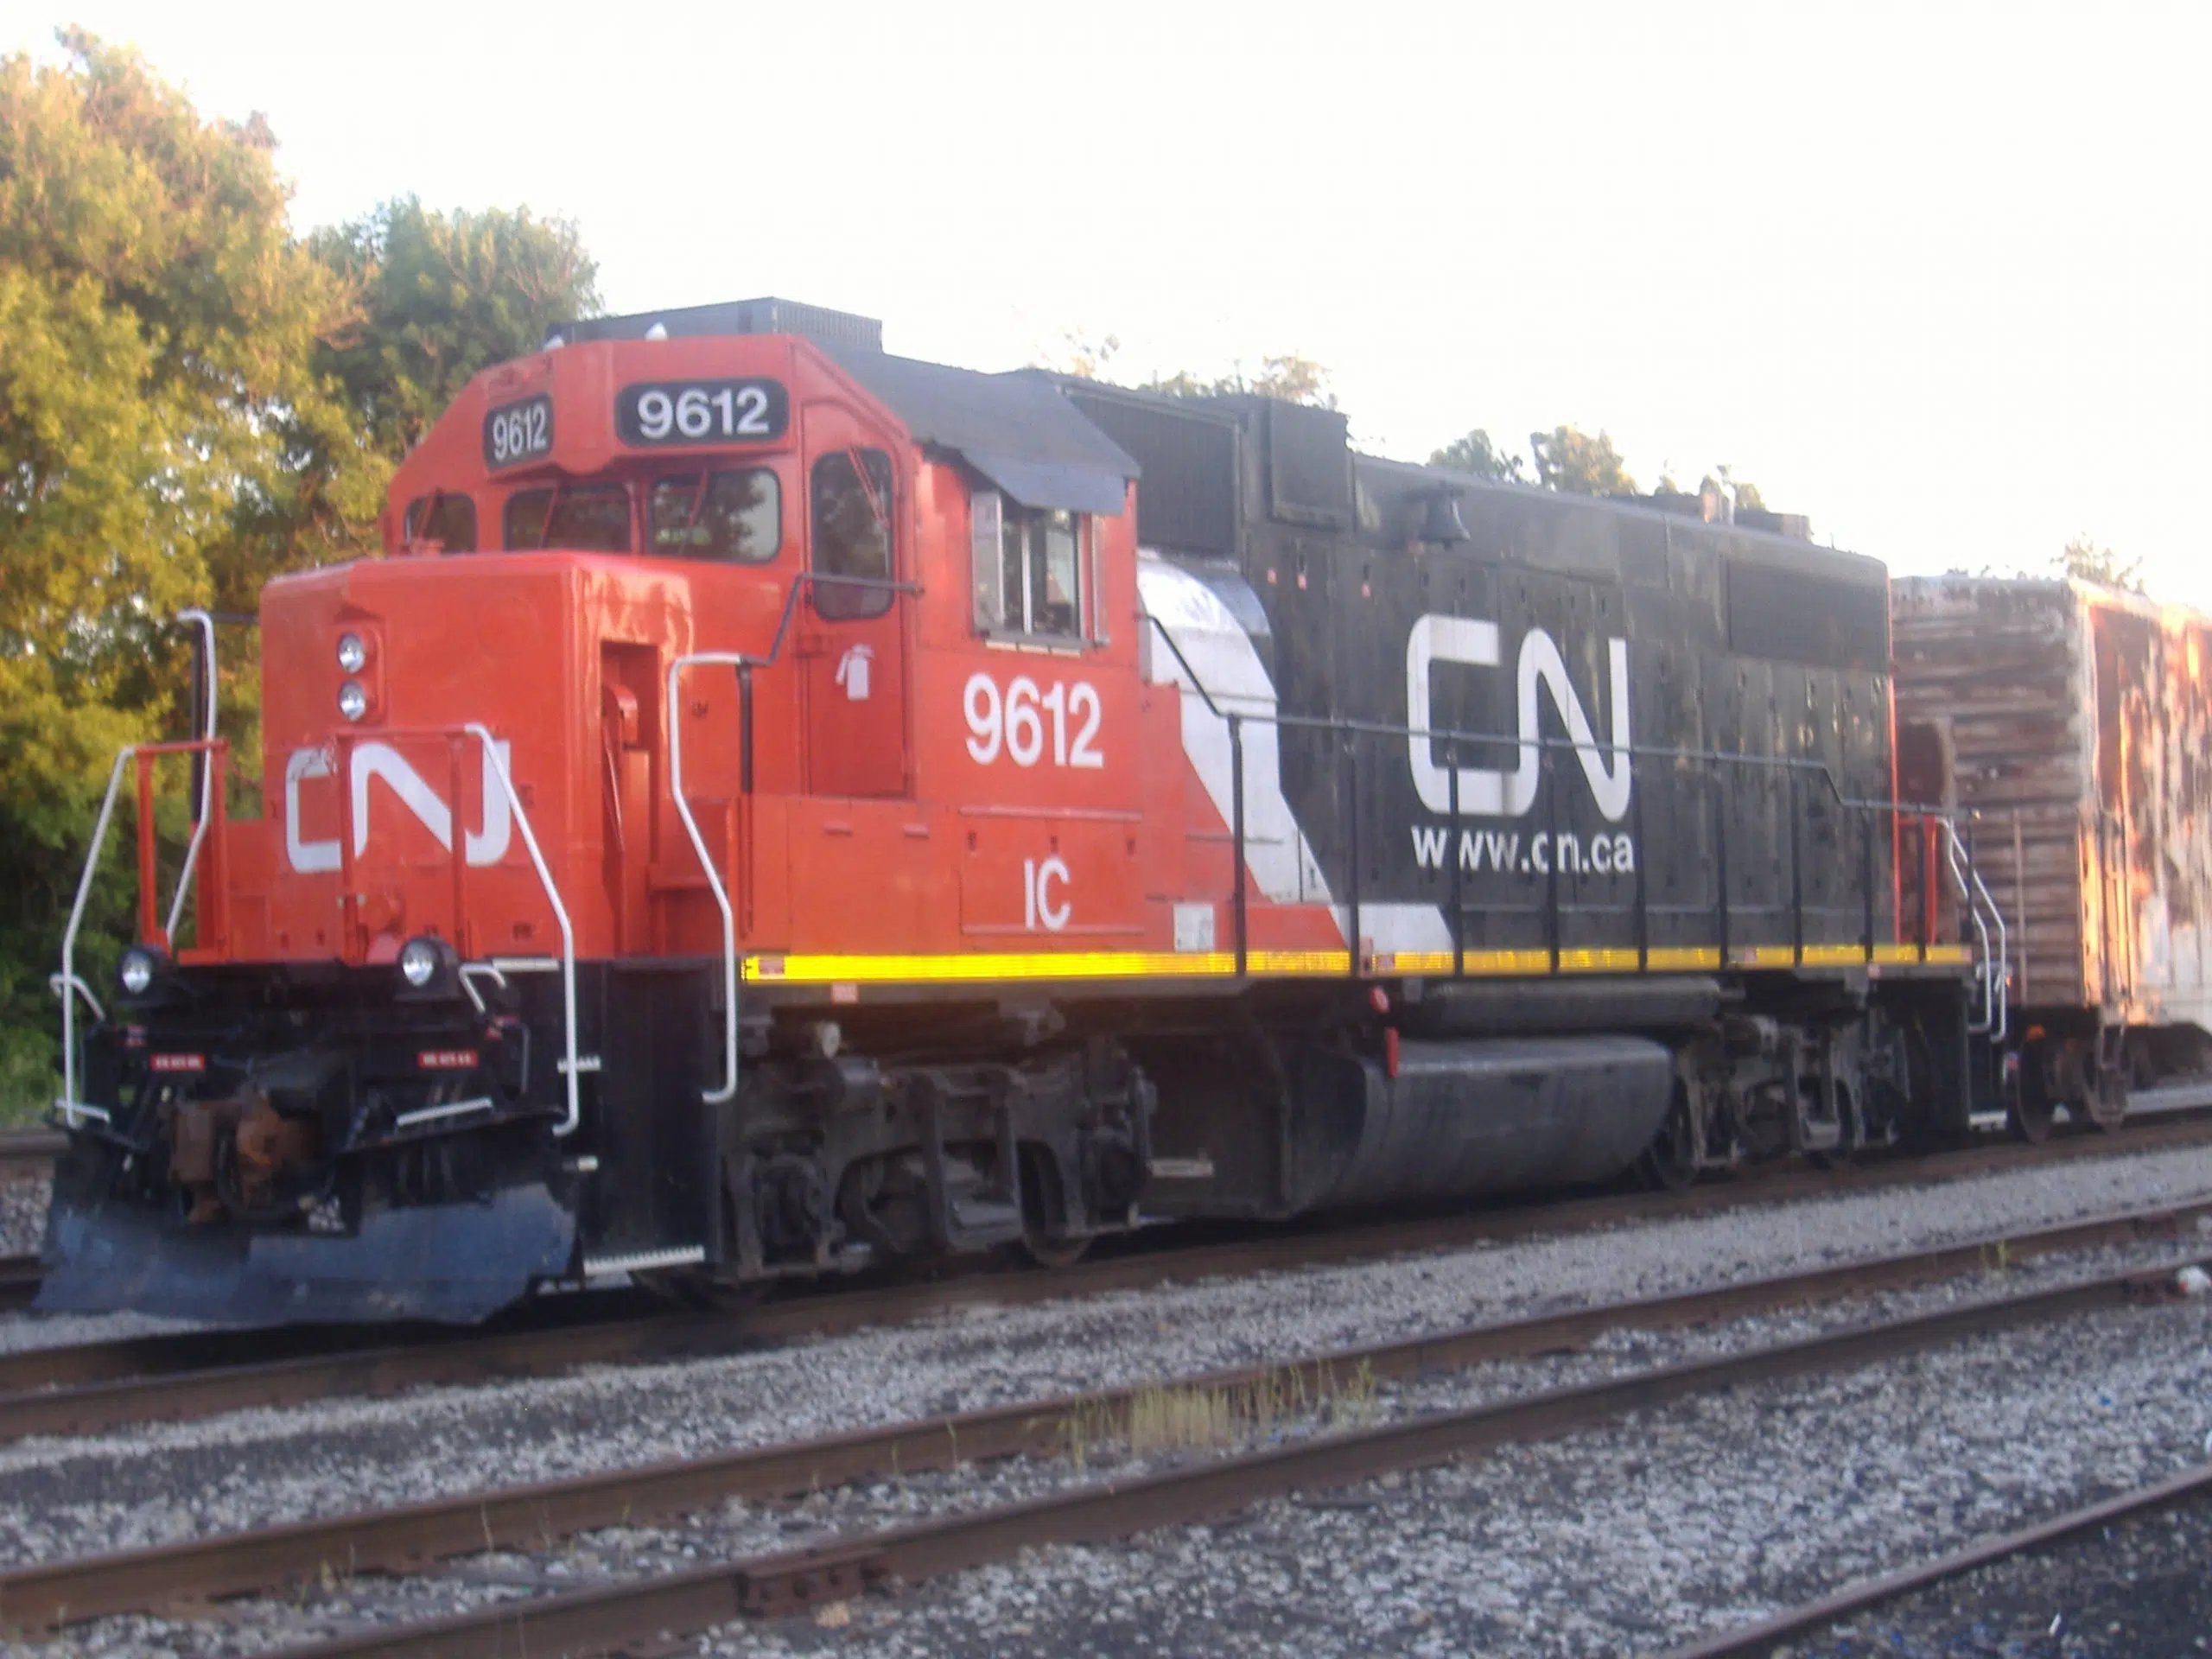 Rayleigh residents hoping for an end to CN train whistling in the area